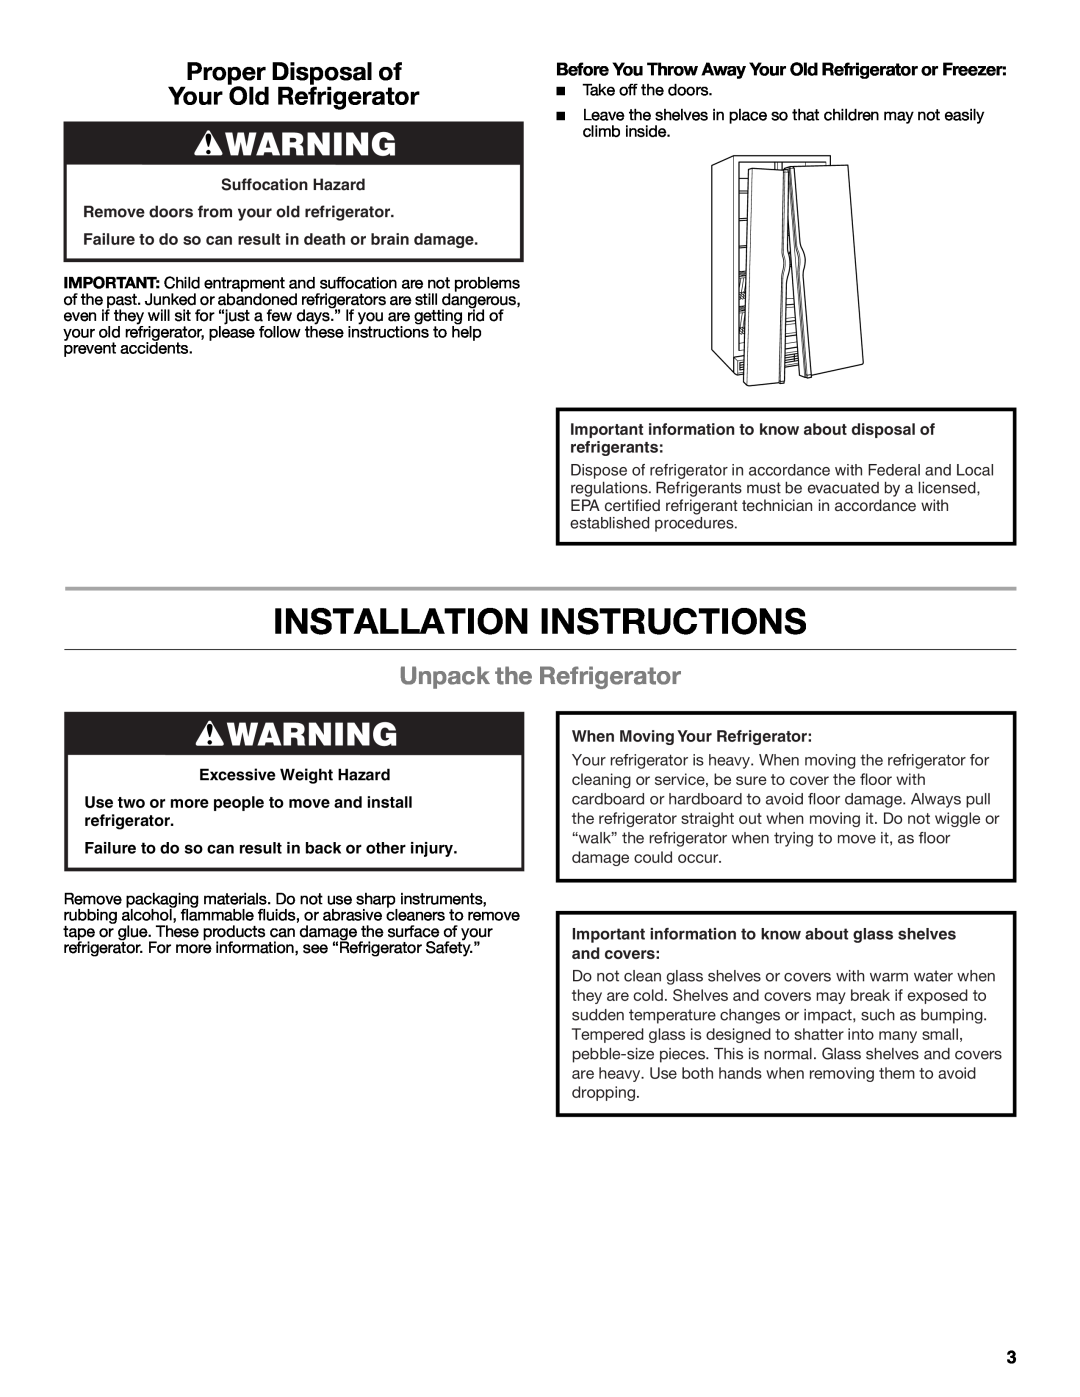 Whirlpool W10632883A Installation Instructions, Proper Disposal of Your Old Refrigerator, Unpack the Refrigerator 